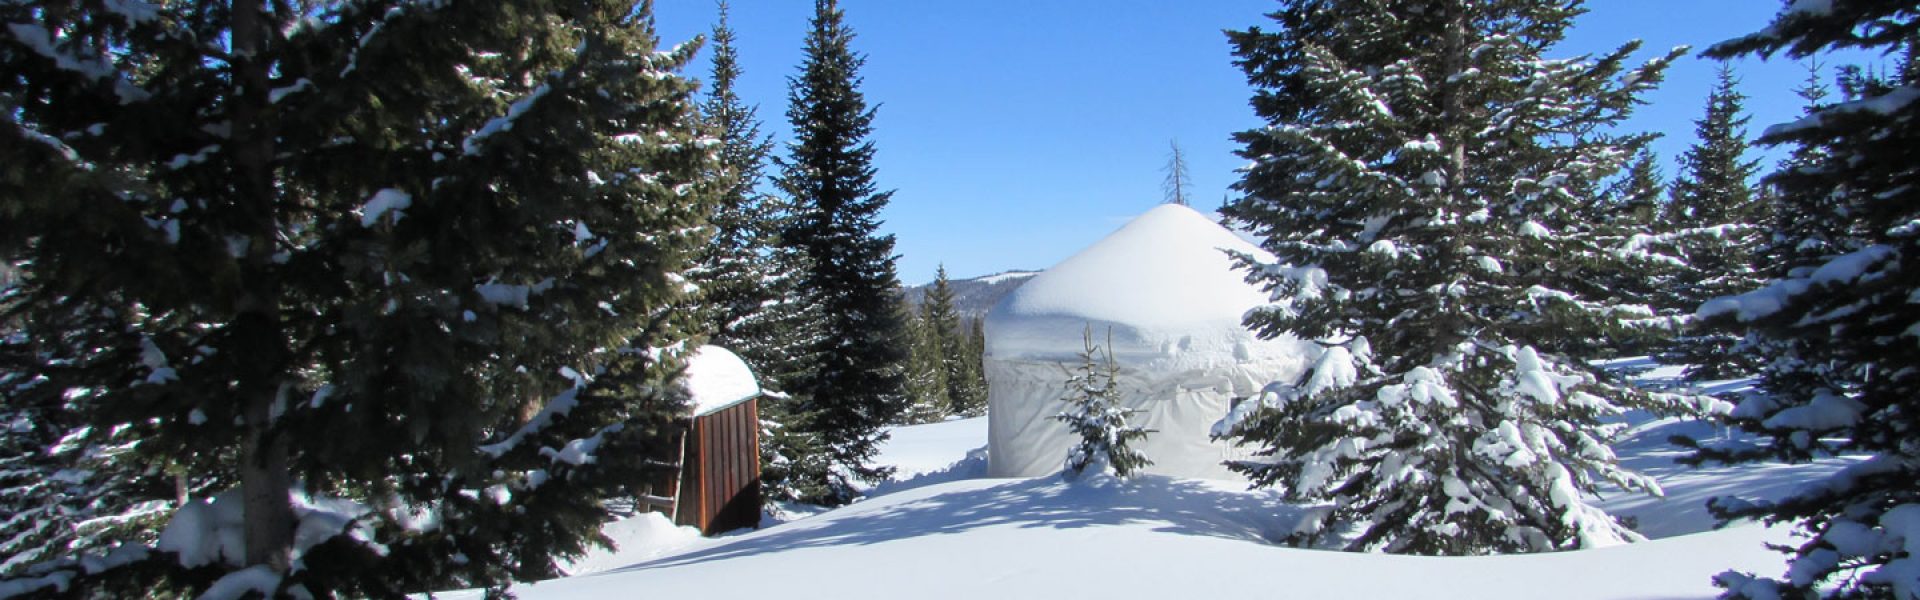 Backcountry Yurts in Taos New Mexico and Southern Colorado